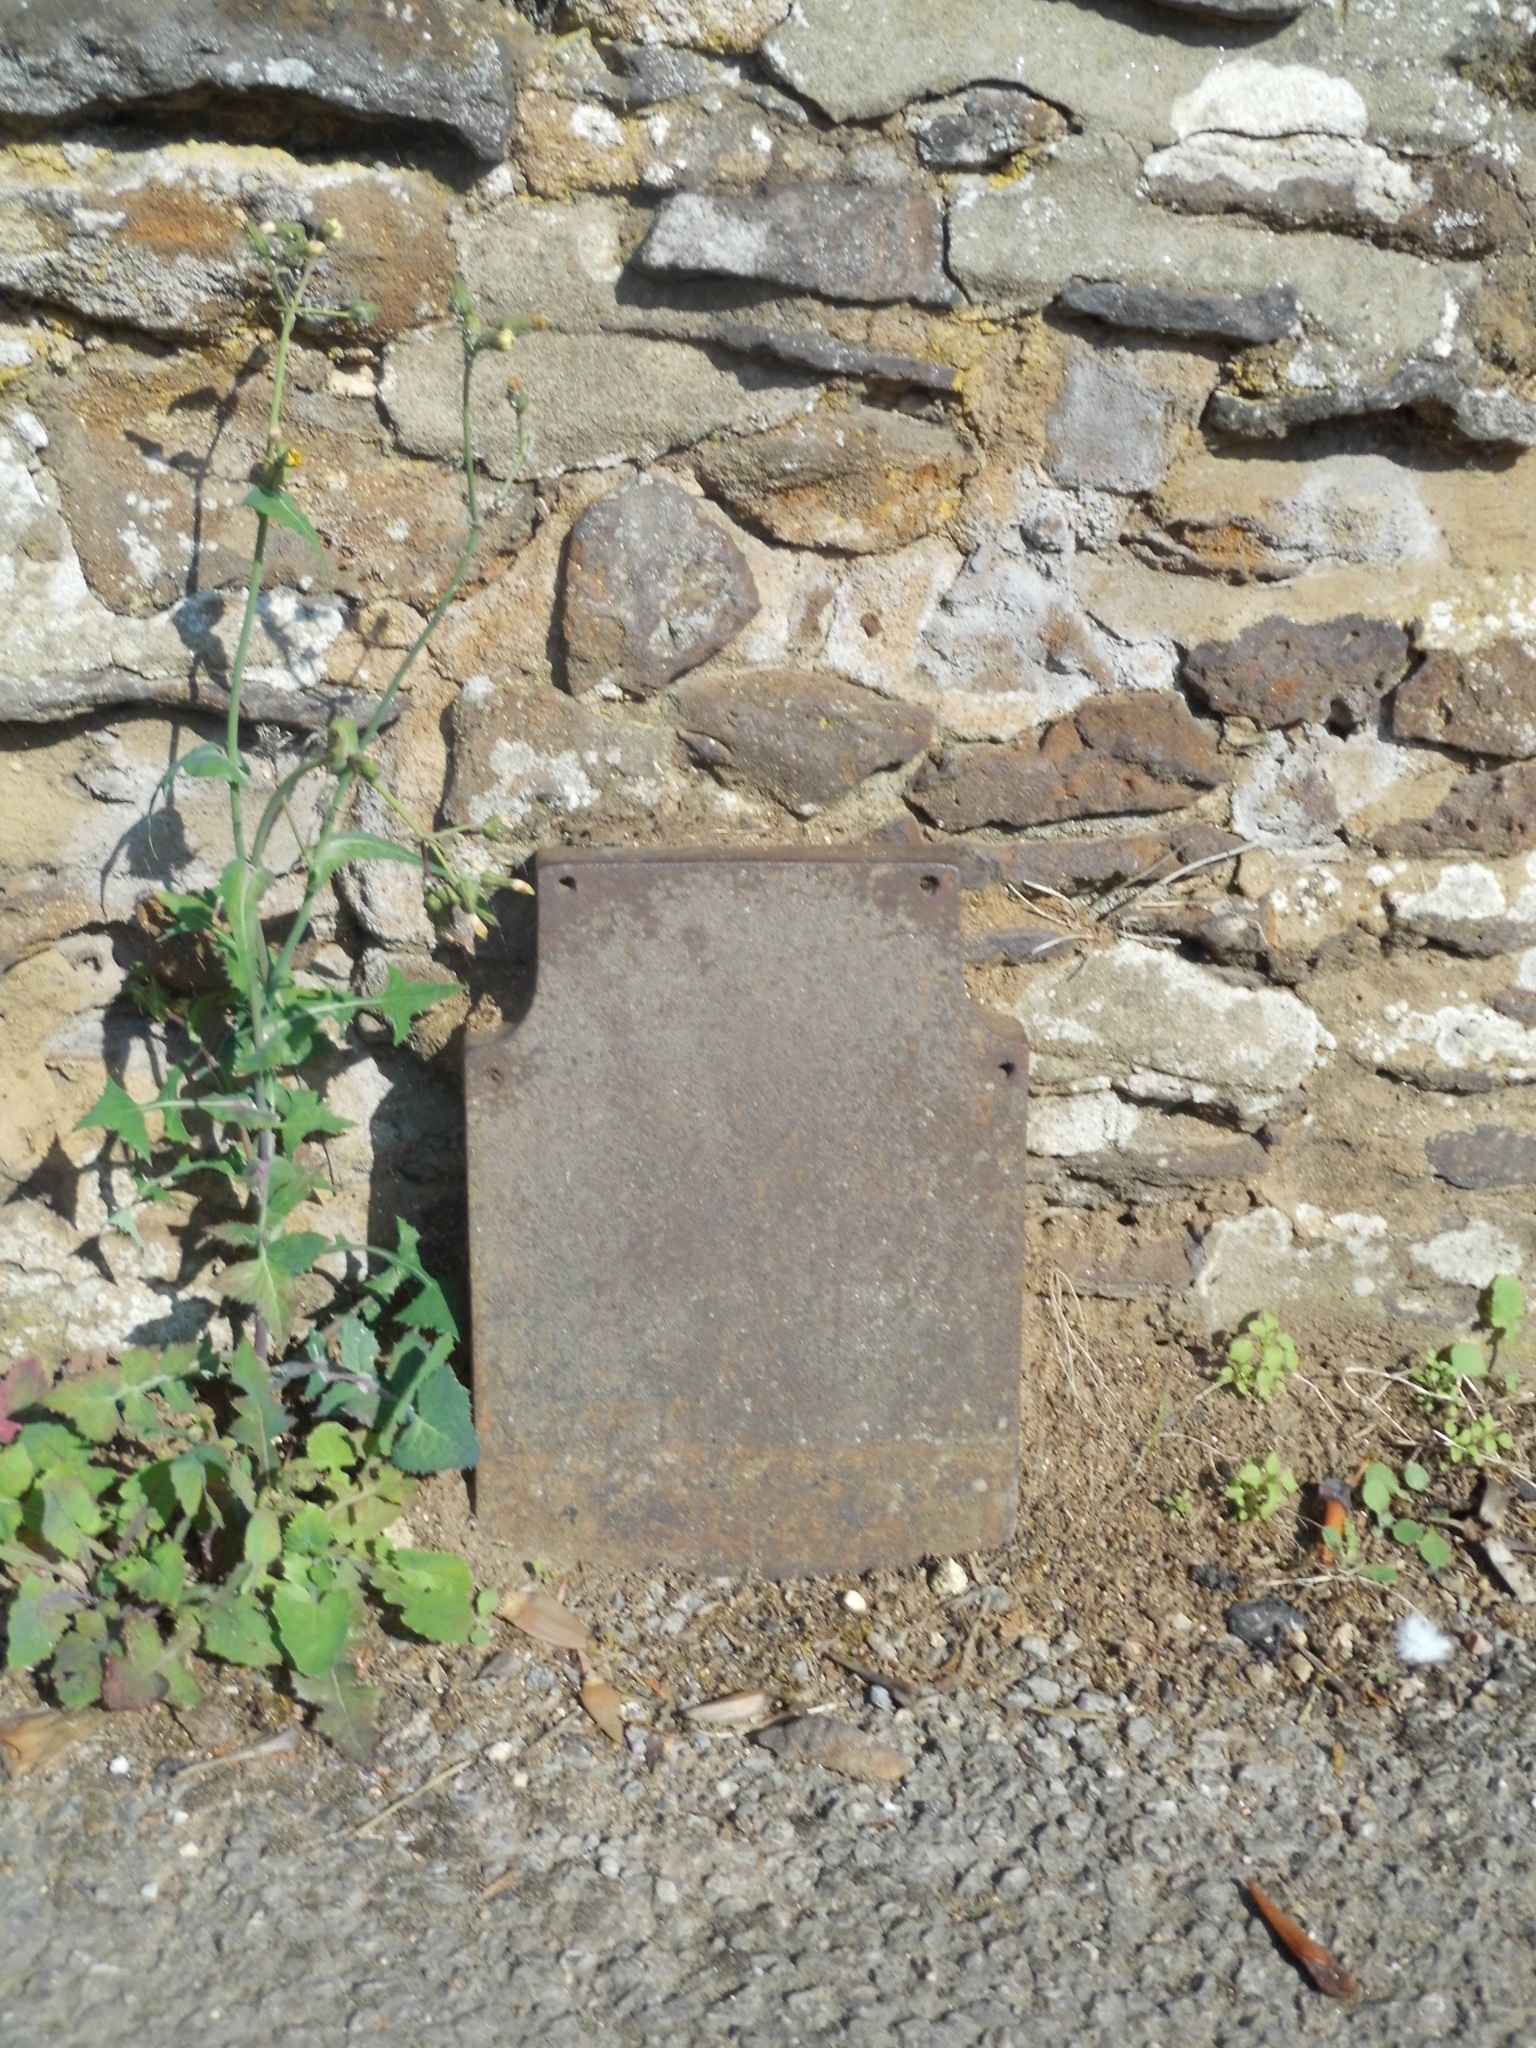 Telegraph cable marker post at 2 Woburn Road, Heath and Reach, Leighton Buzzard by Derek Pattenson 